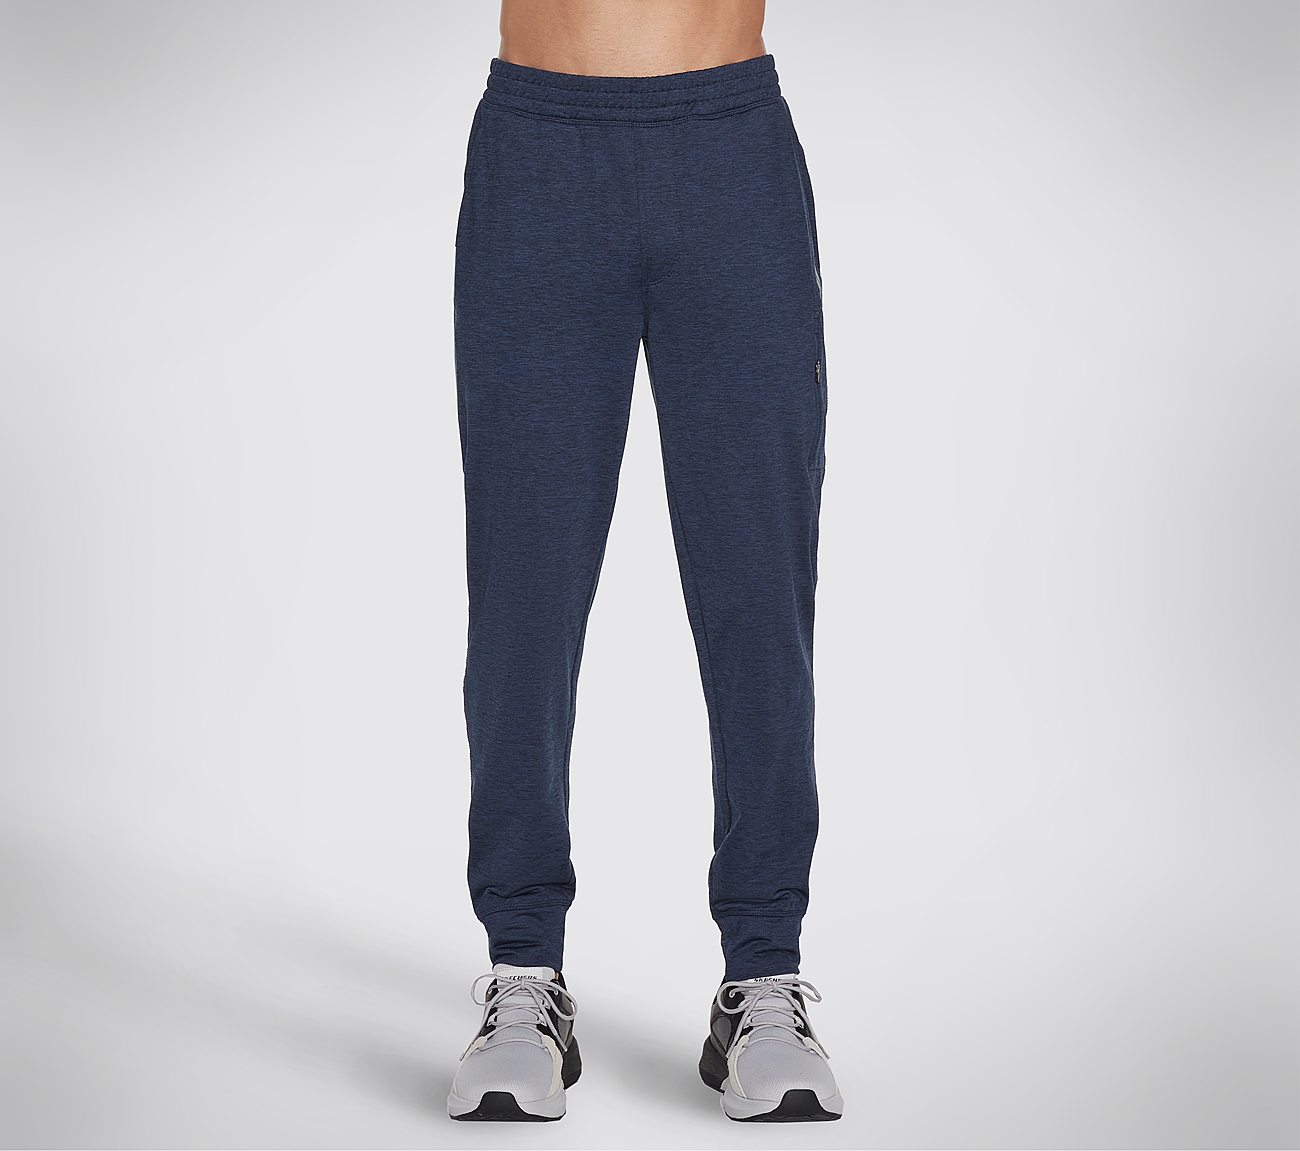 SKECH-KNITS ULTRA GO JOGGER, NNNAVY Apparel Lateral View